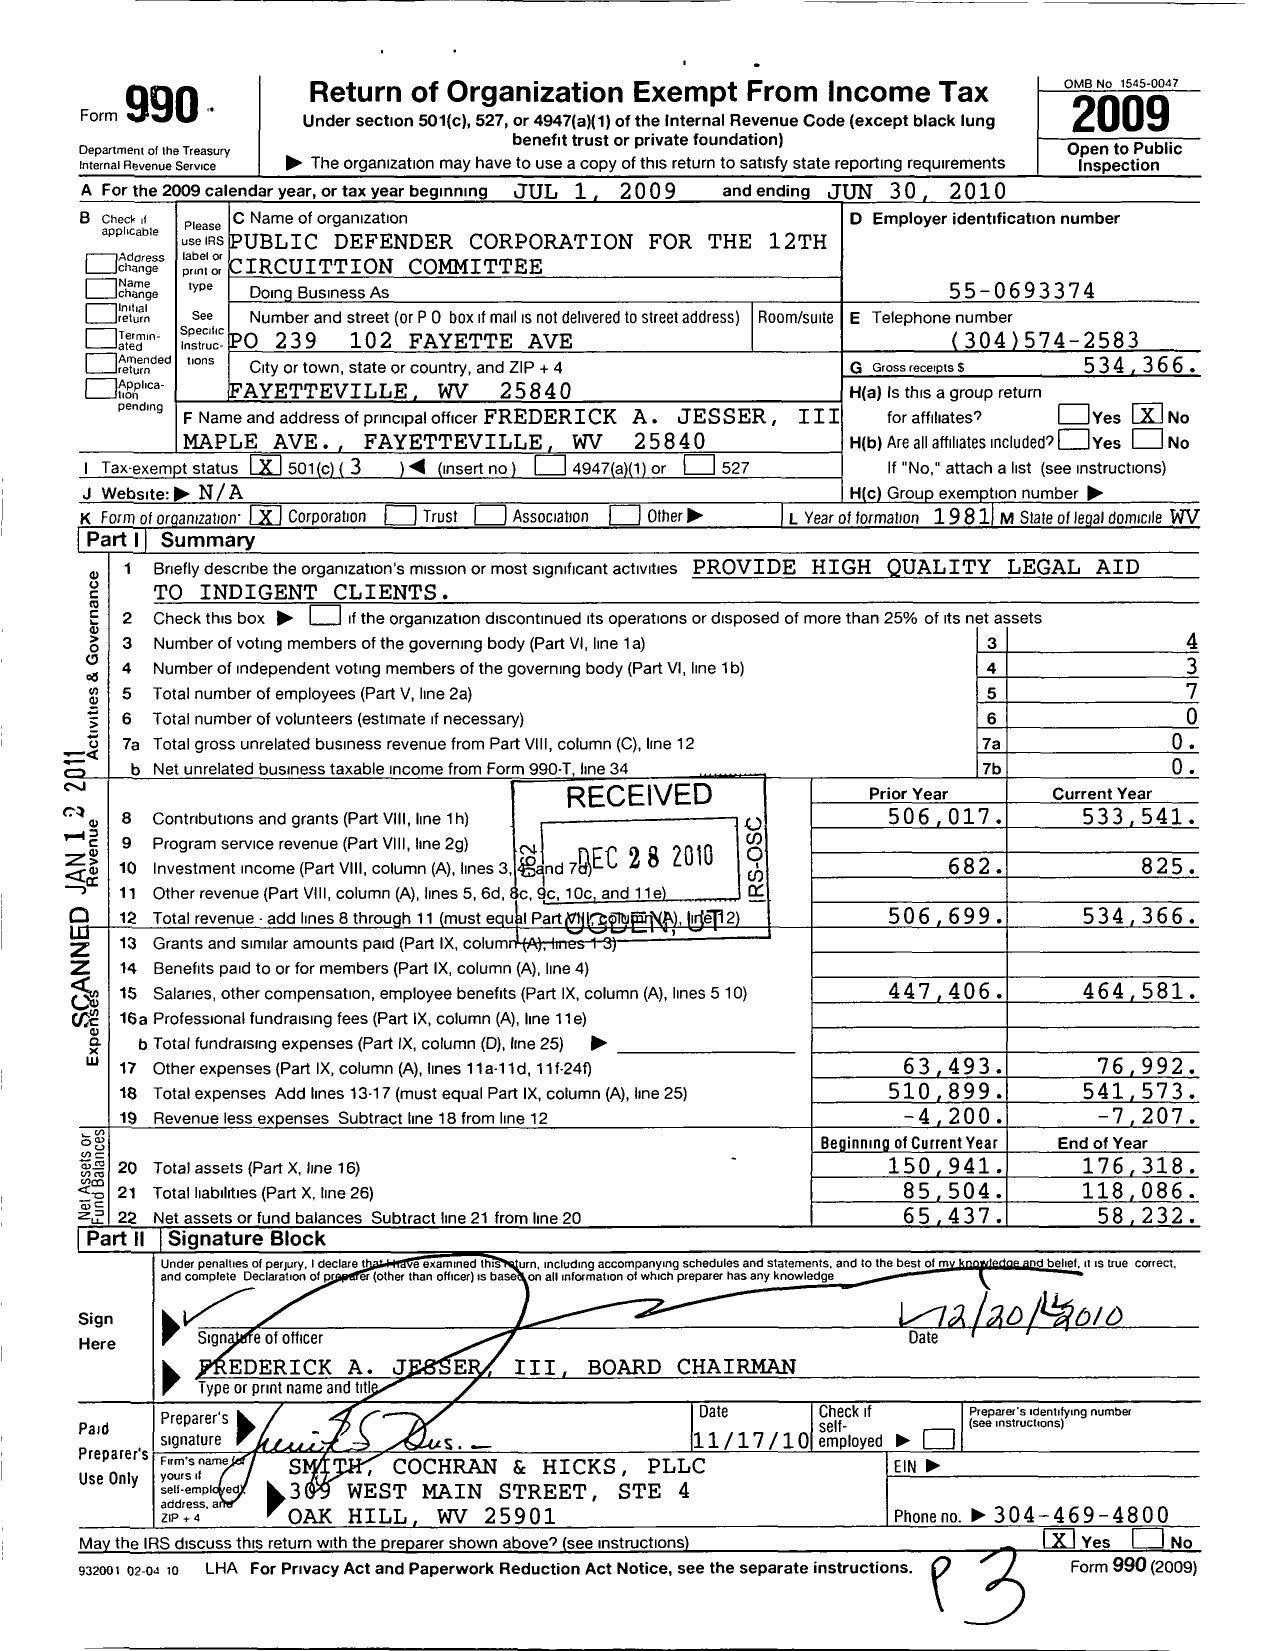 Image of first page of 2009 Form 990 for Public Defender Corporation for the 12TH Circulation